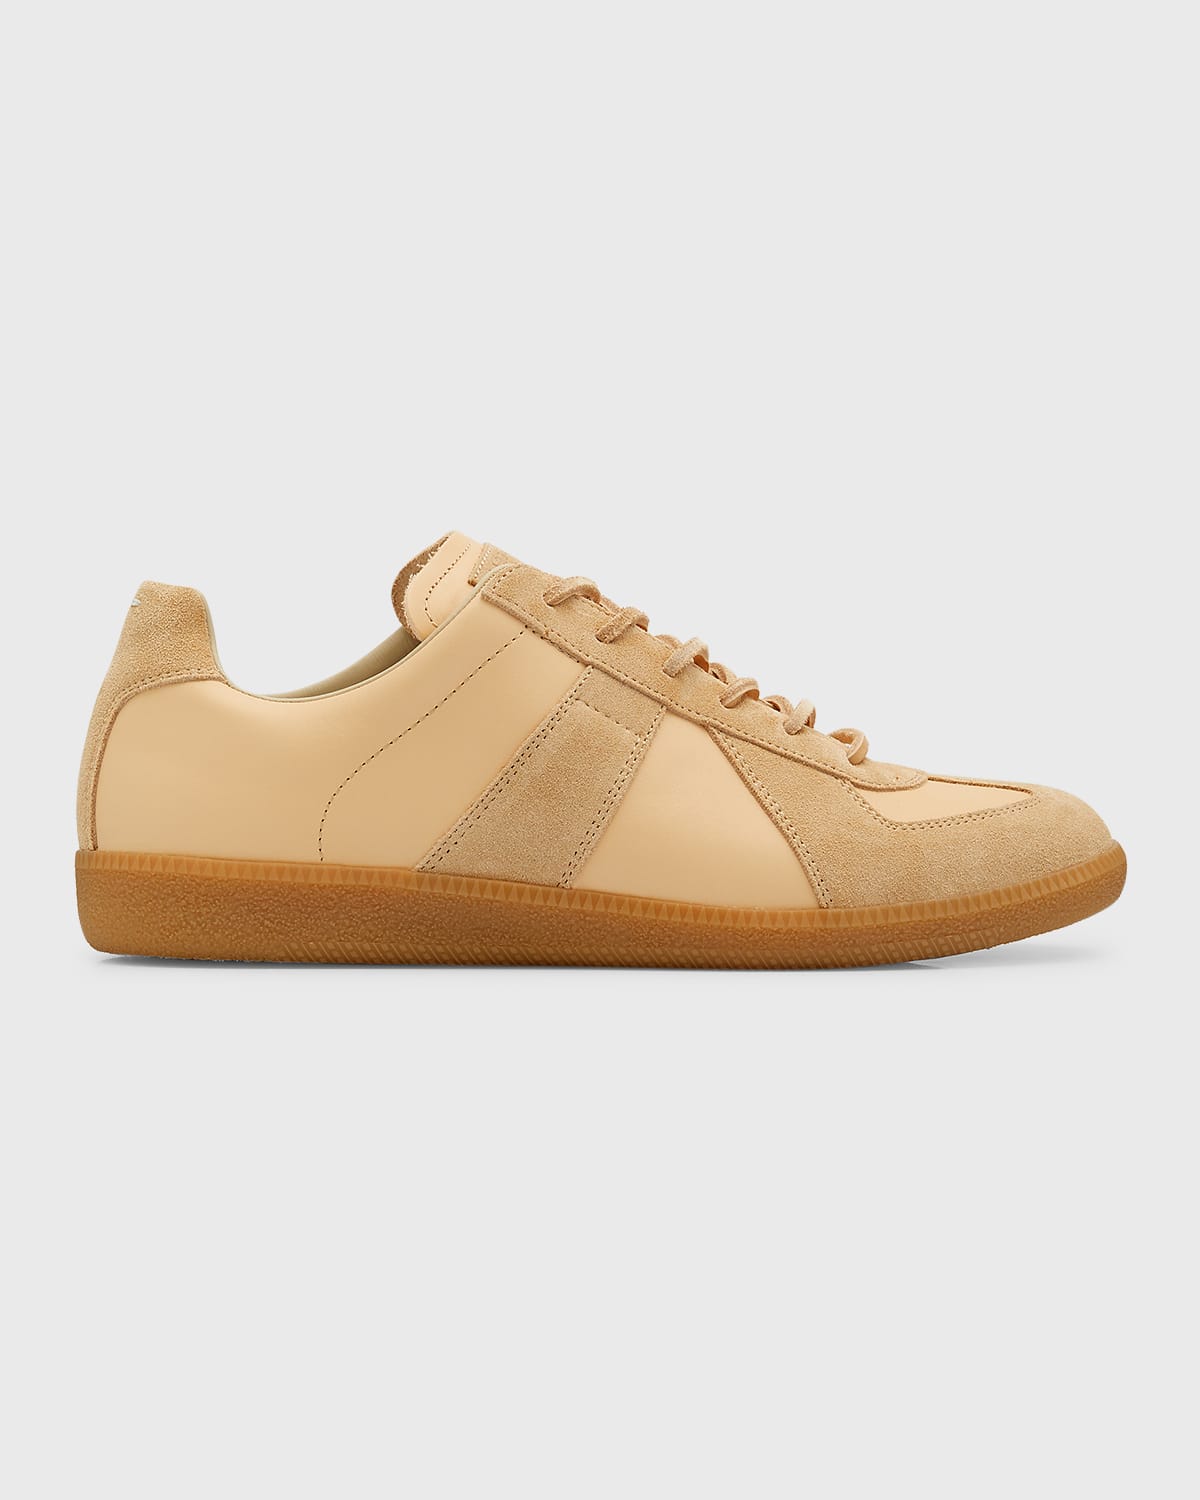 Maison Margiela Replica Leather & Suede Low Top Trainers In Chamois